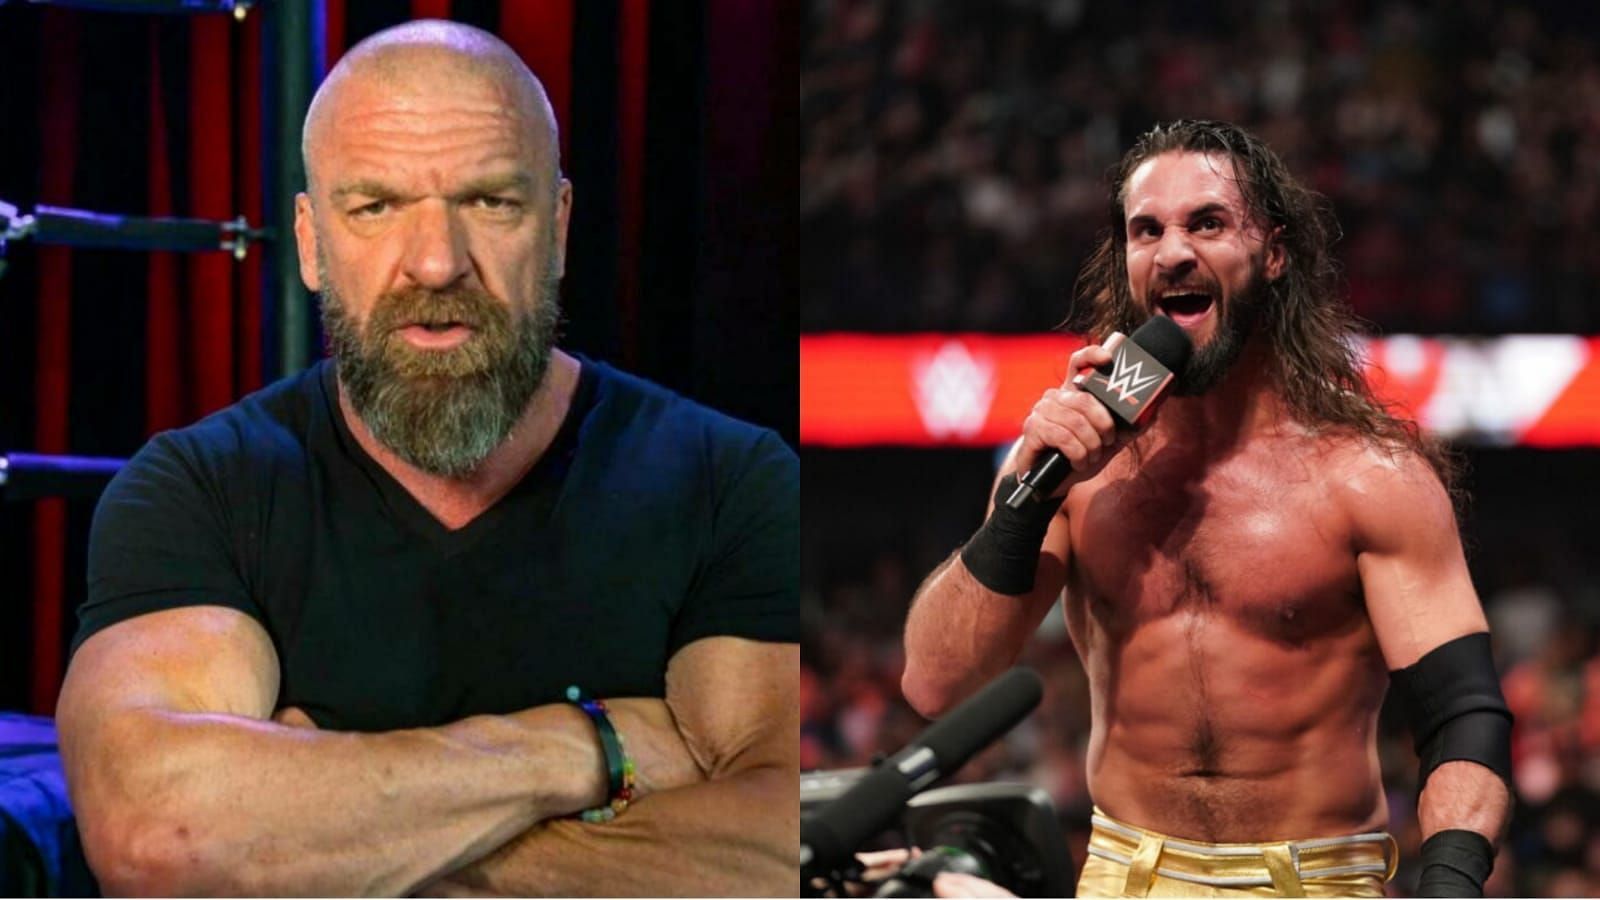 Triple H(left) and Seth Rollins(right)